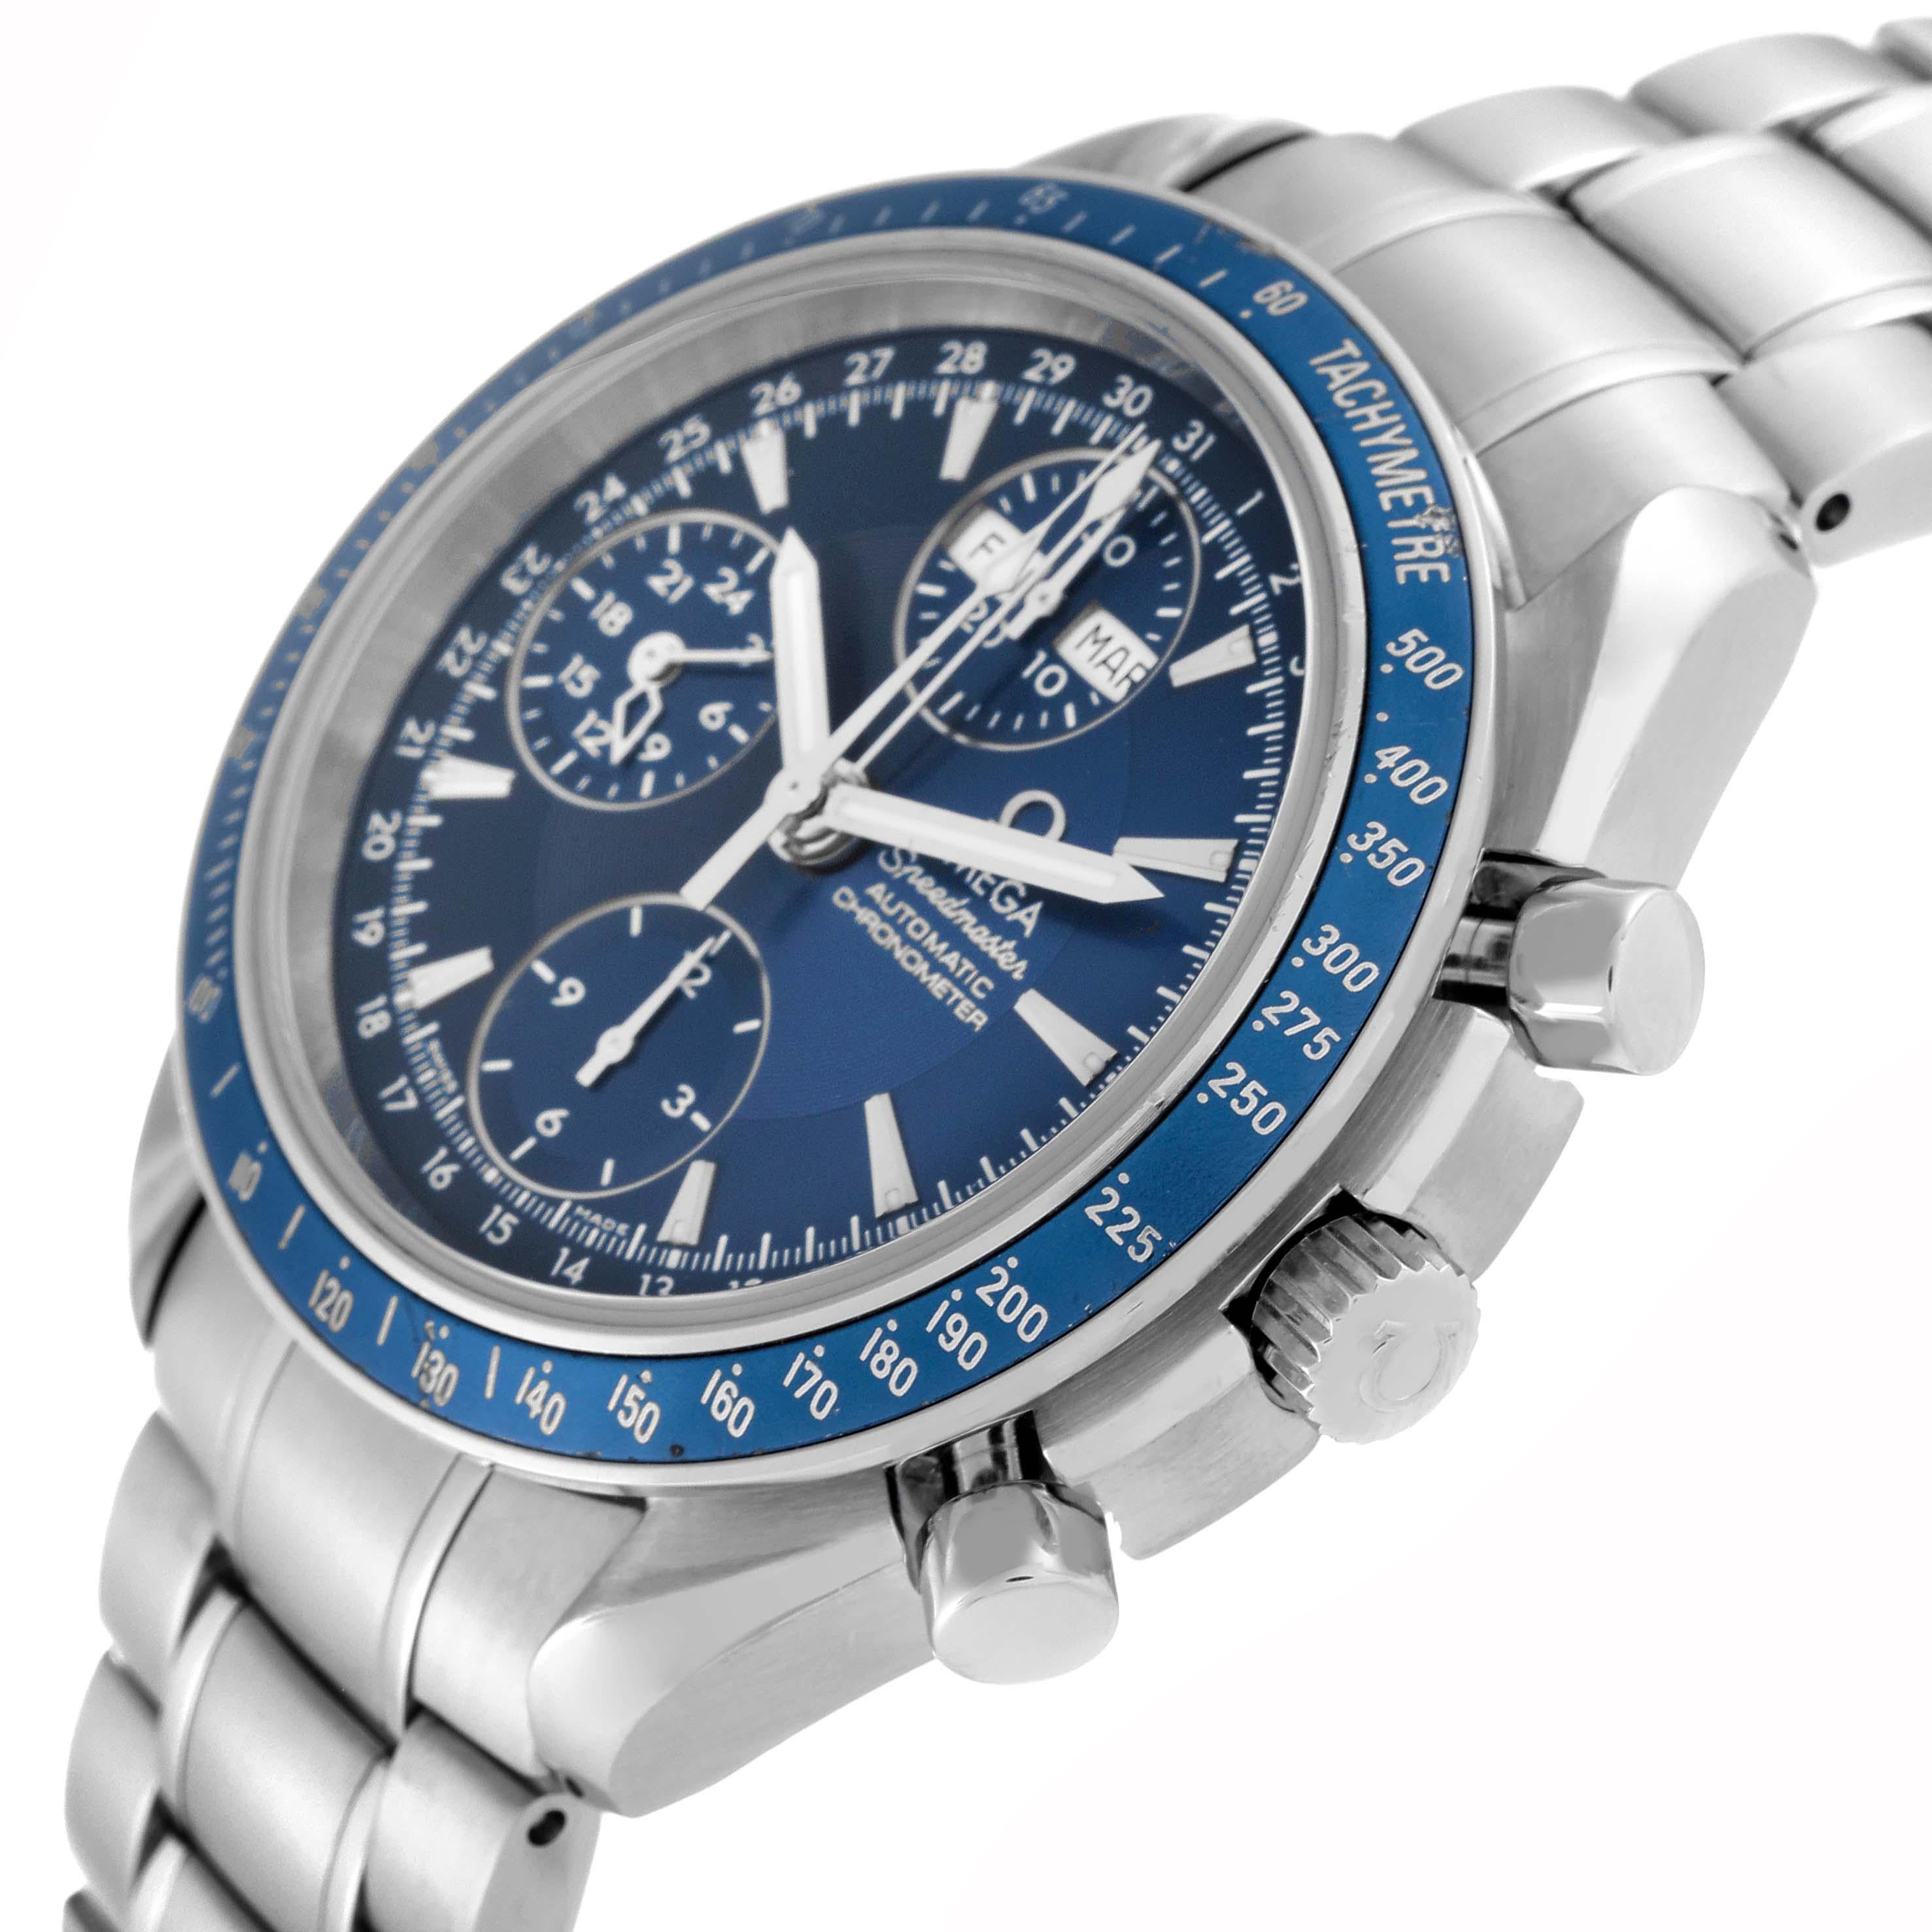 Omega Speedmaster Day Date Blue Dial Chronograph Steel Mens Watch 3222.80.00 Box Card. Automatic self-winding chronograph movement. Stainless steel round case 39.0 mm in diameter. Blue bezel with tachymeter scale. Scratch-resistant sapphire crystal